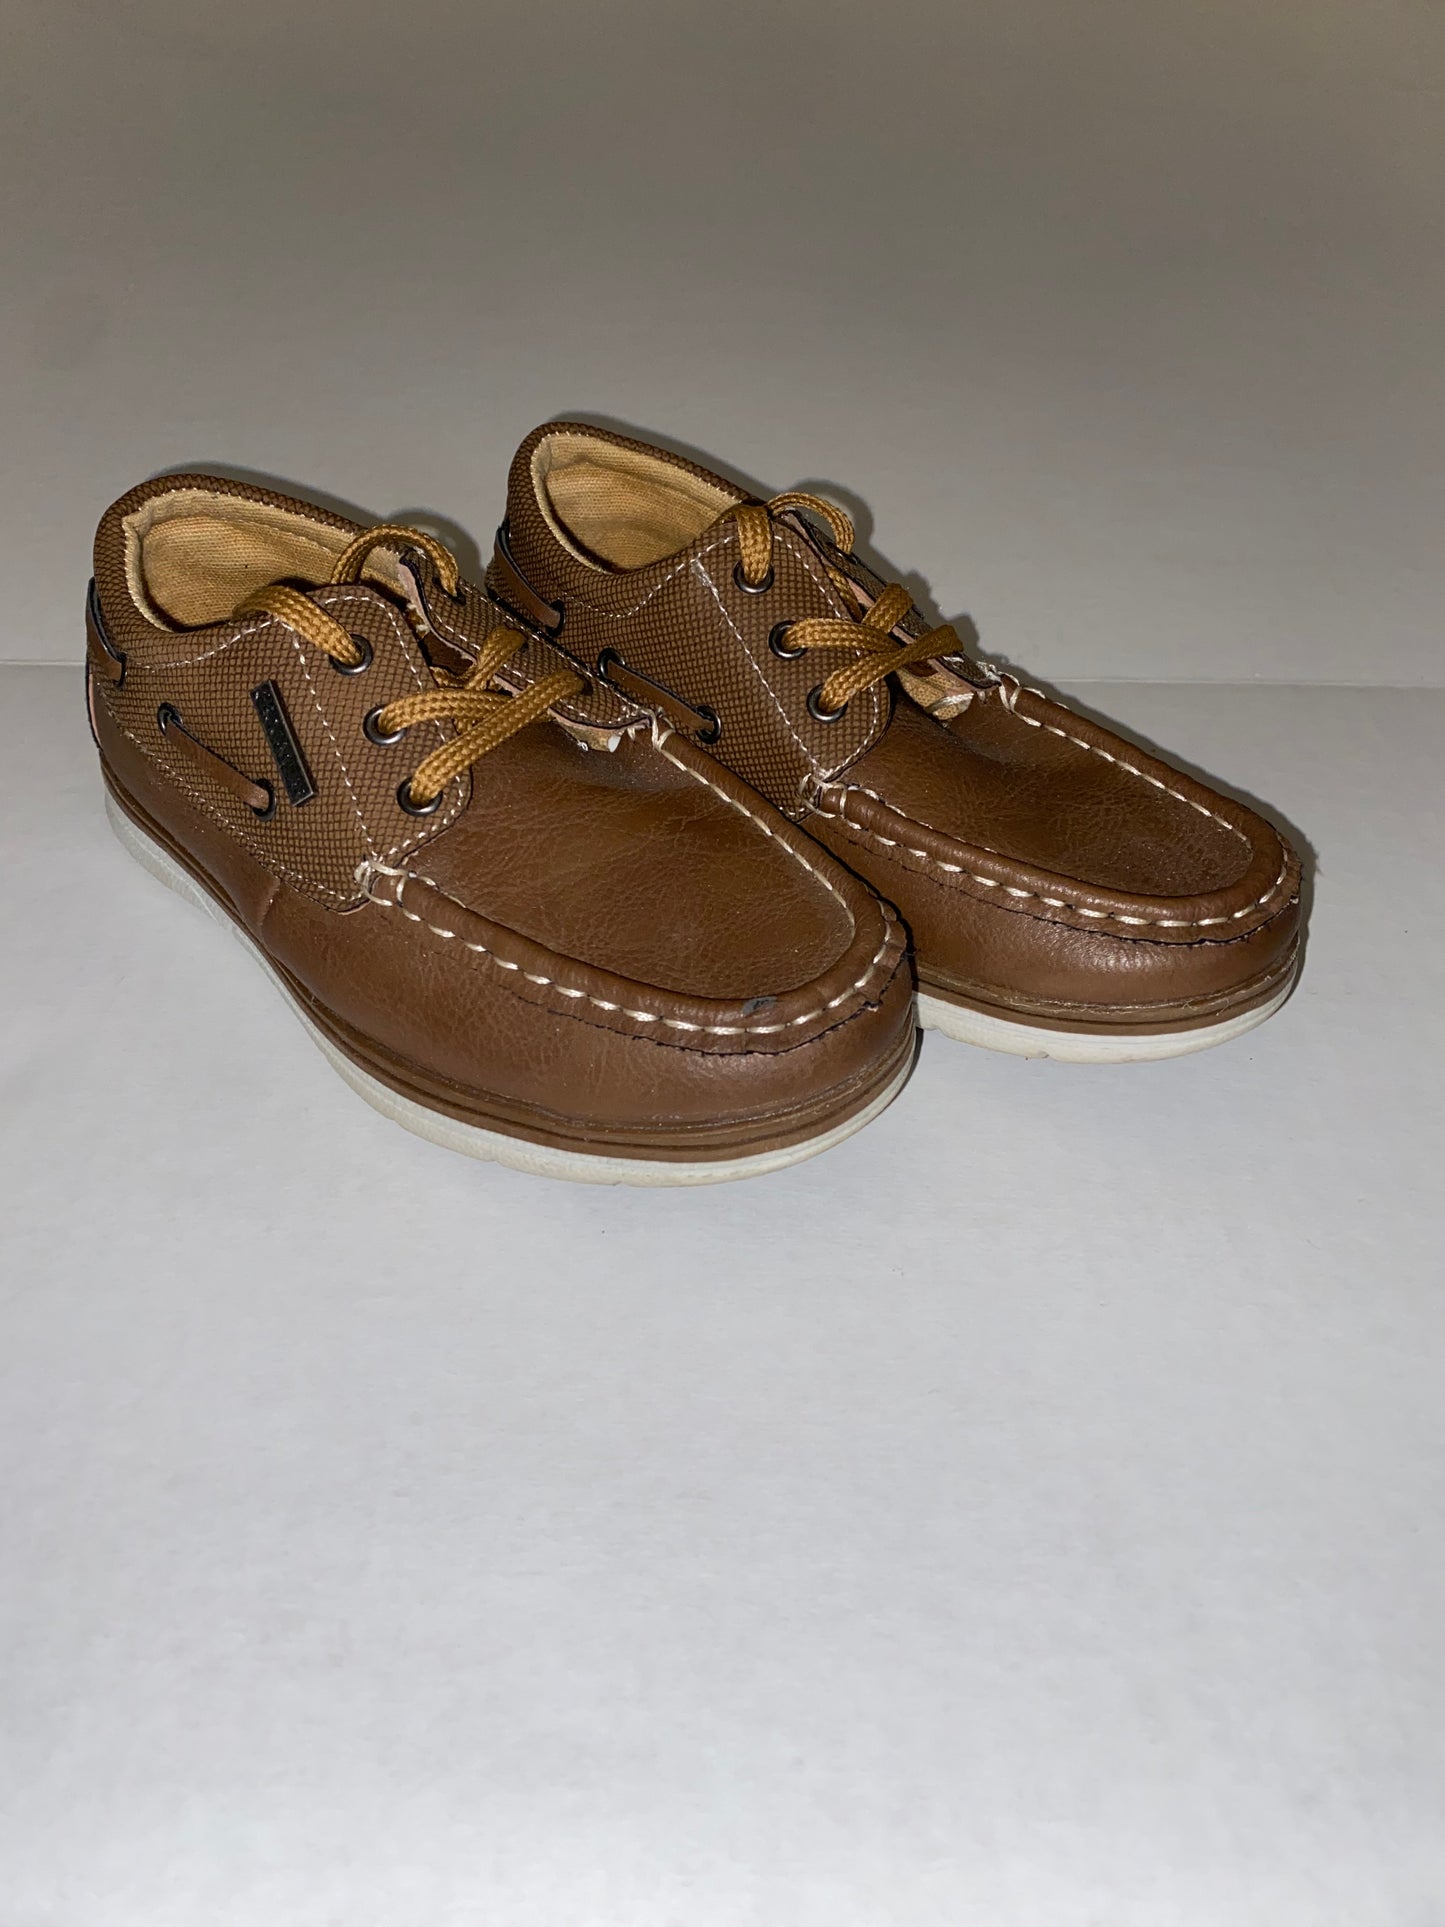 Boys 10T, Rocawear - brown loafers